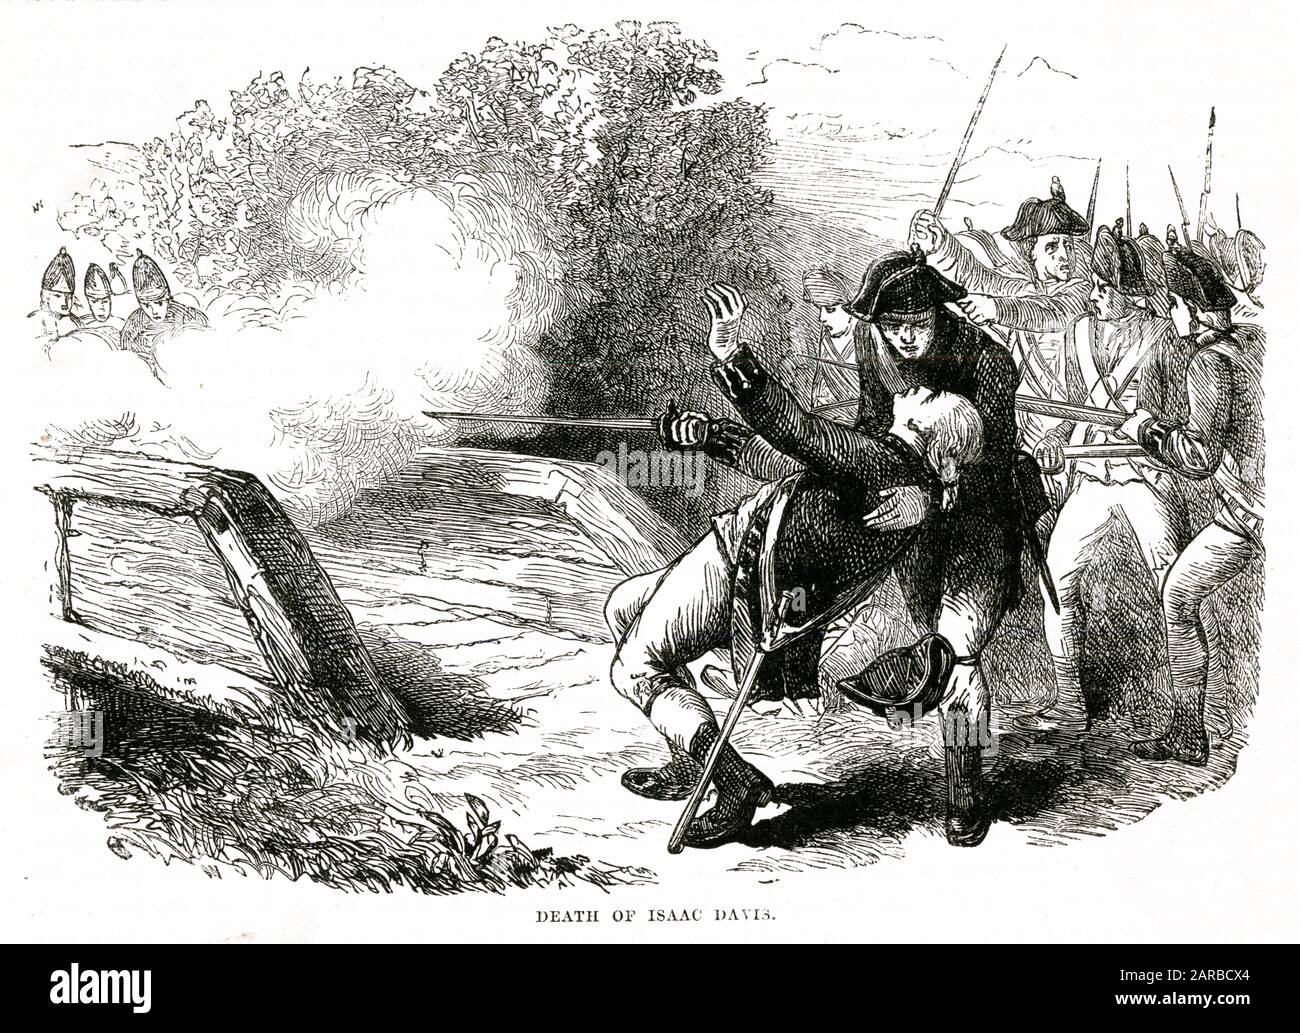 isaac Davis is shot and killed at Old North Bridge during the battle of Concord and was the first American officer to die during American War of Independence on April 19th 1775     Date: 1775 Stock Photo